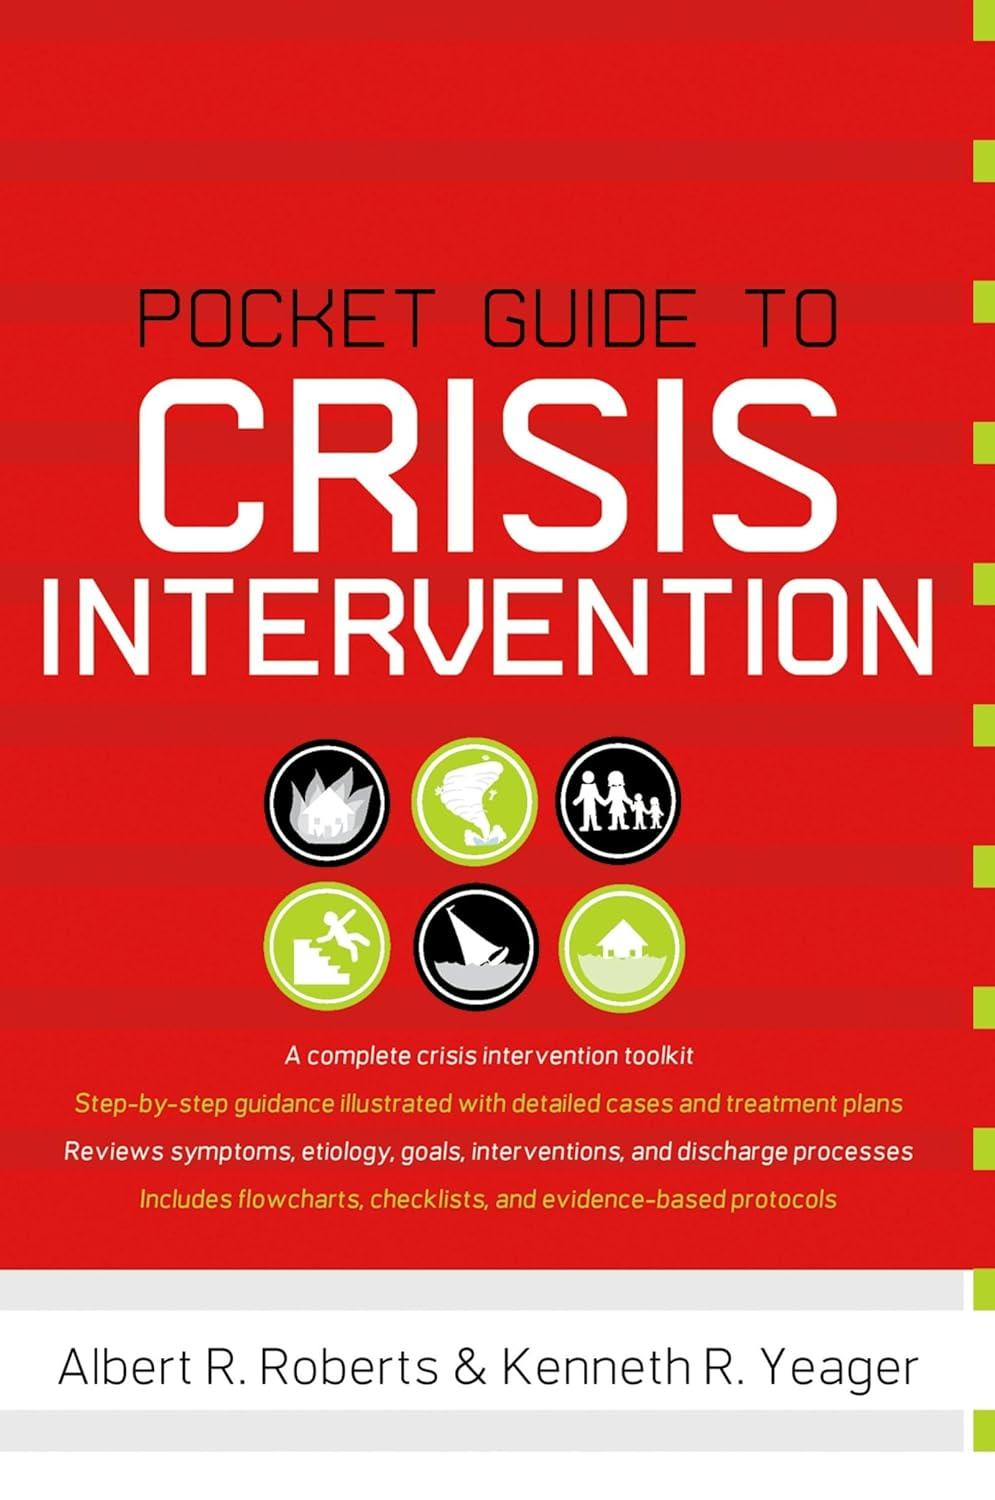 pocket guide to crisis intervention 1st edition albert r roberts, kenneth r yeager 0195382900, 978-0195382907